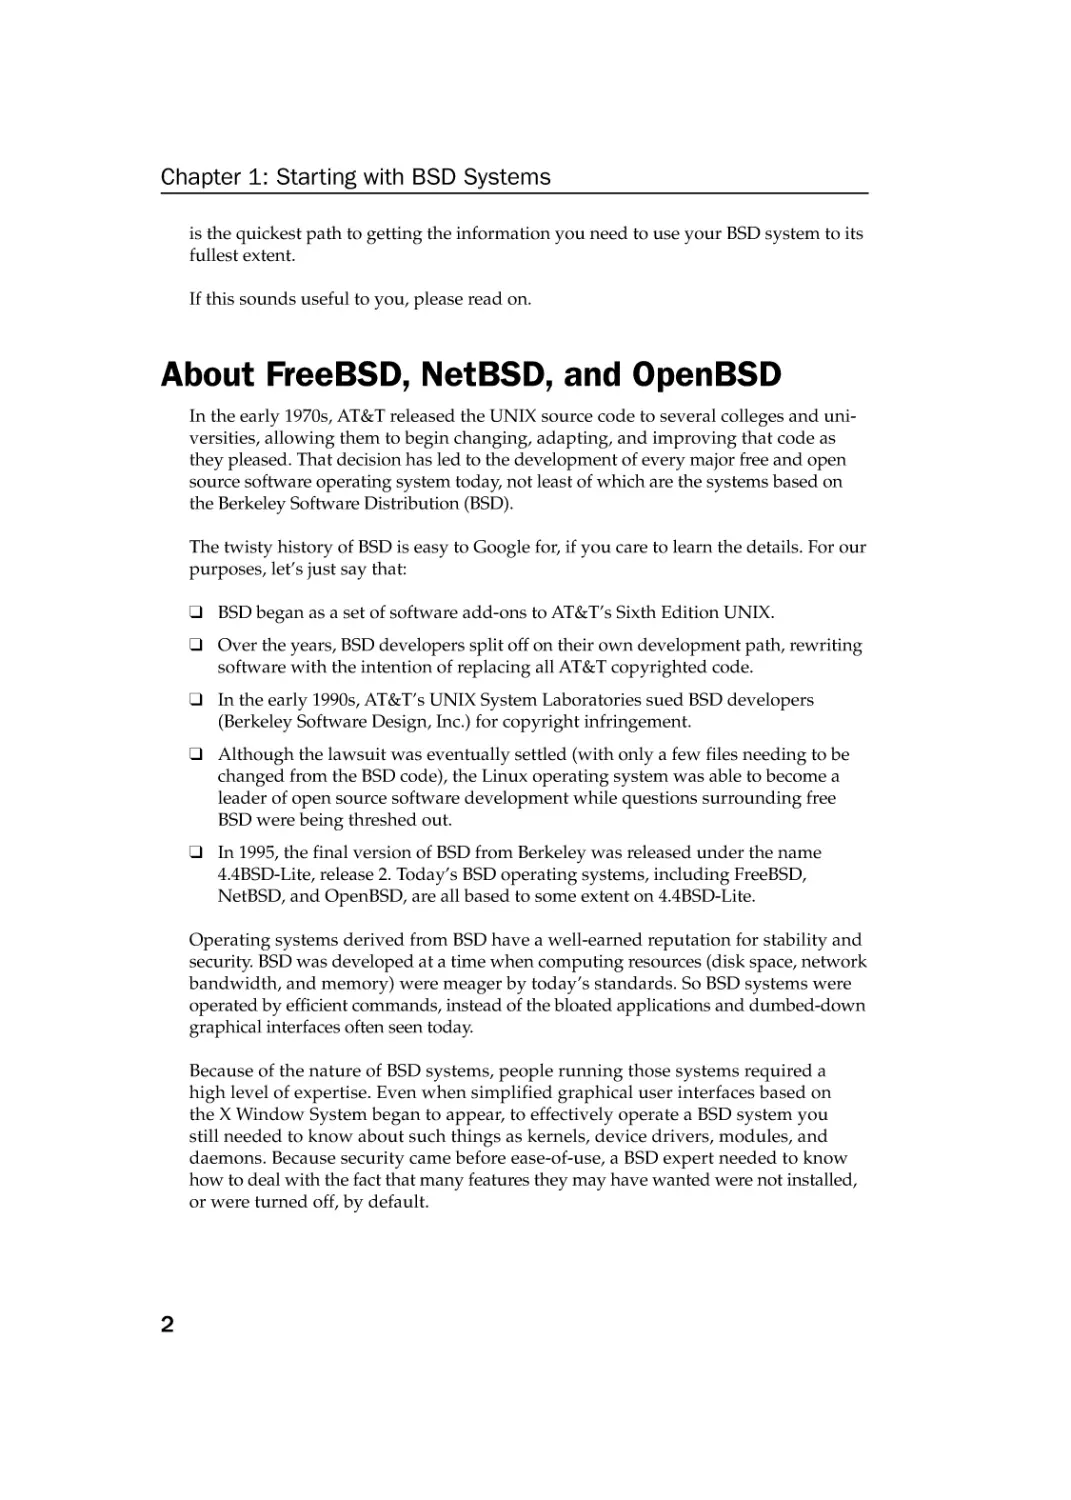 About FreeBSD, NetBSD, and OpenBSD